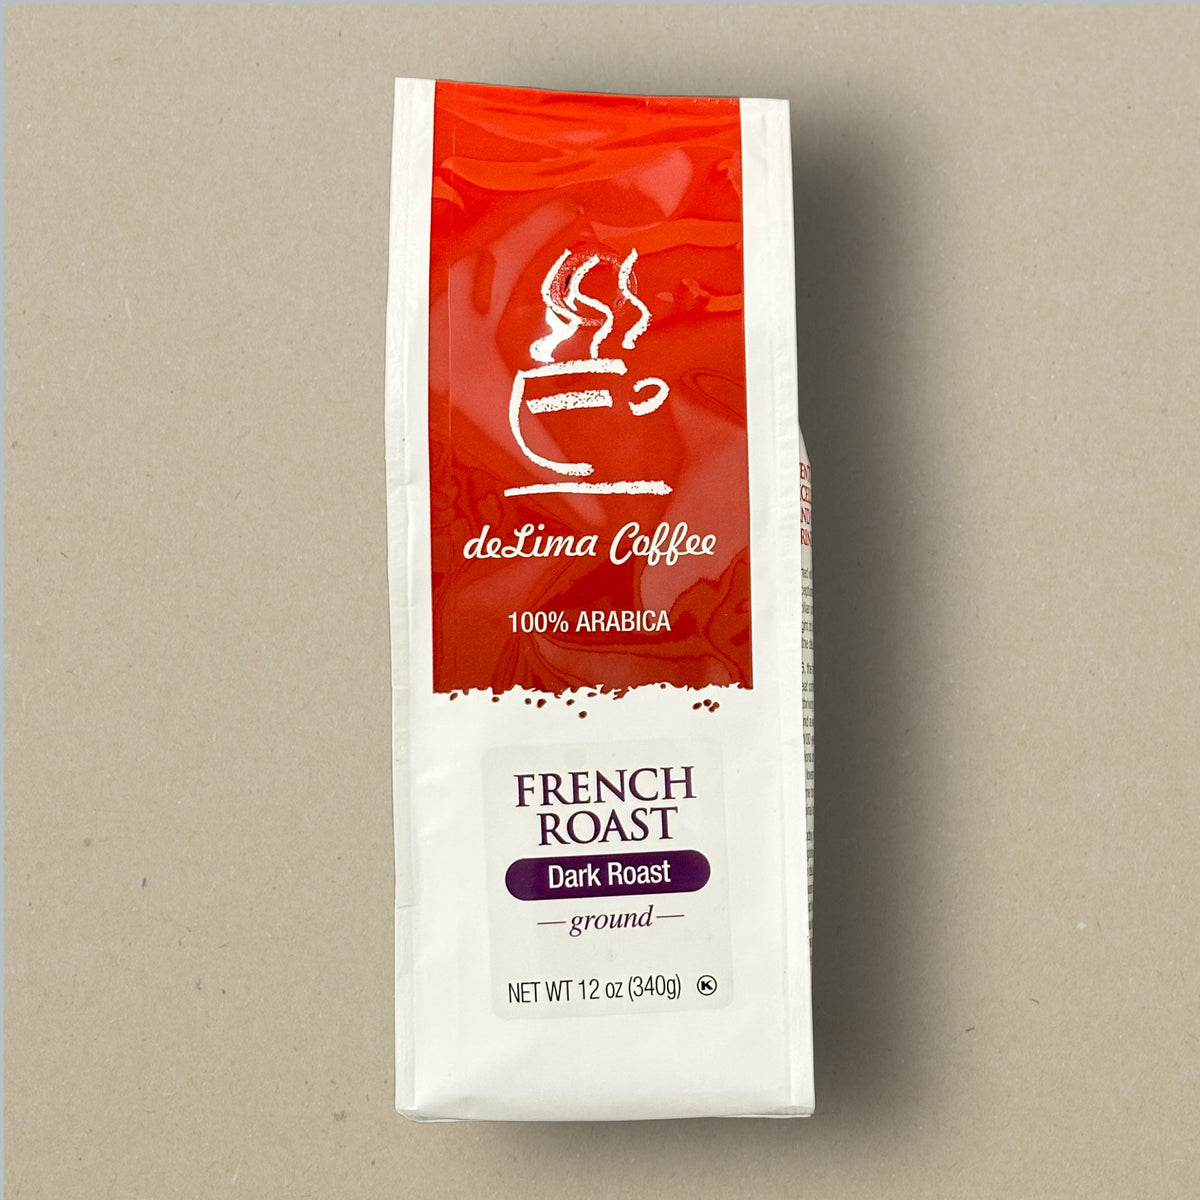 Paul deLima Coffee French Roast 12 oz. Ground – deLima Coffee Factory Store